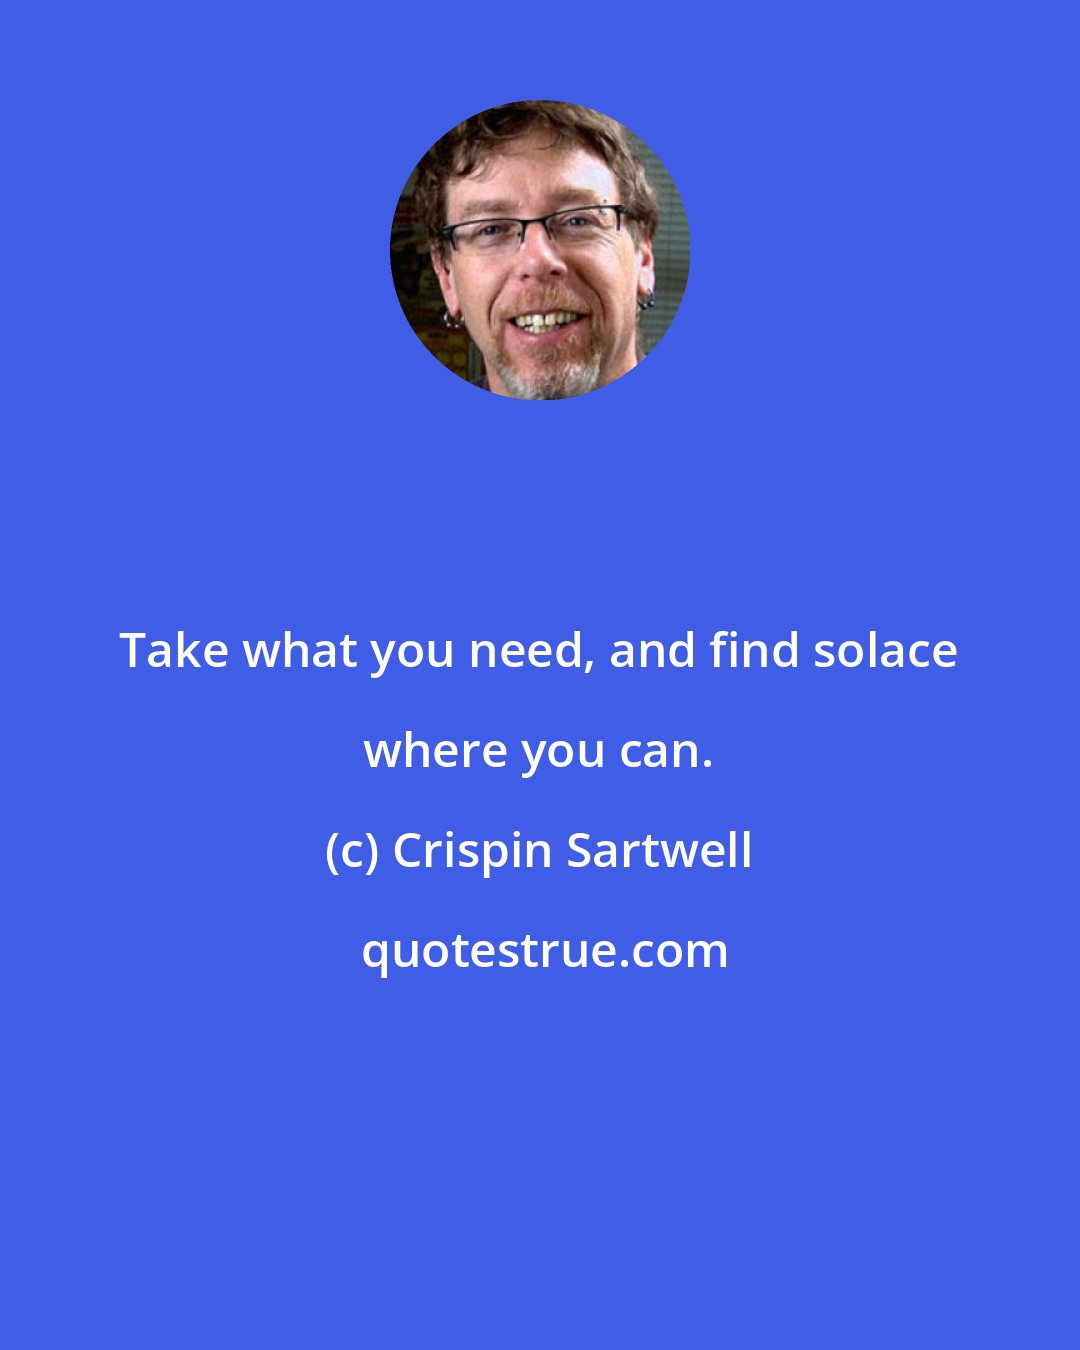 Crispin Sartwell: Take what you need, and find solace where you can.